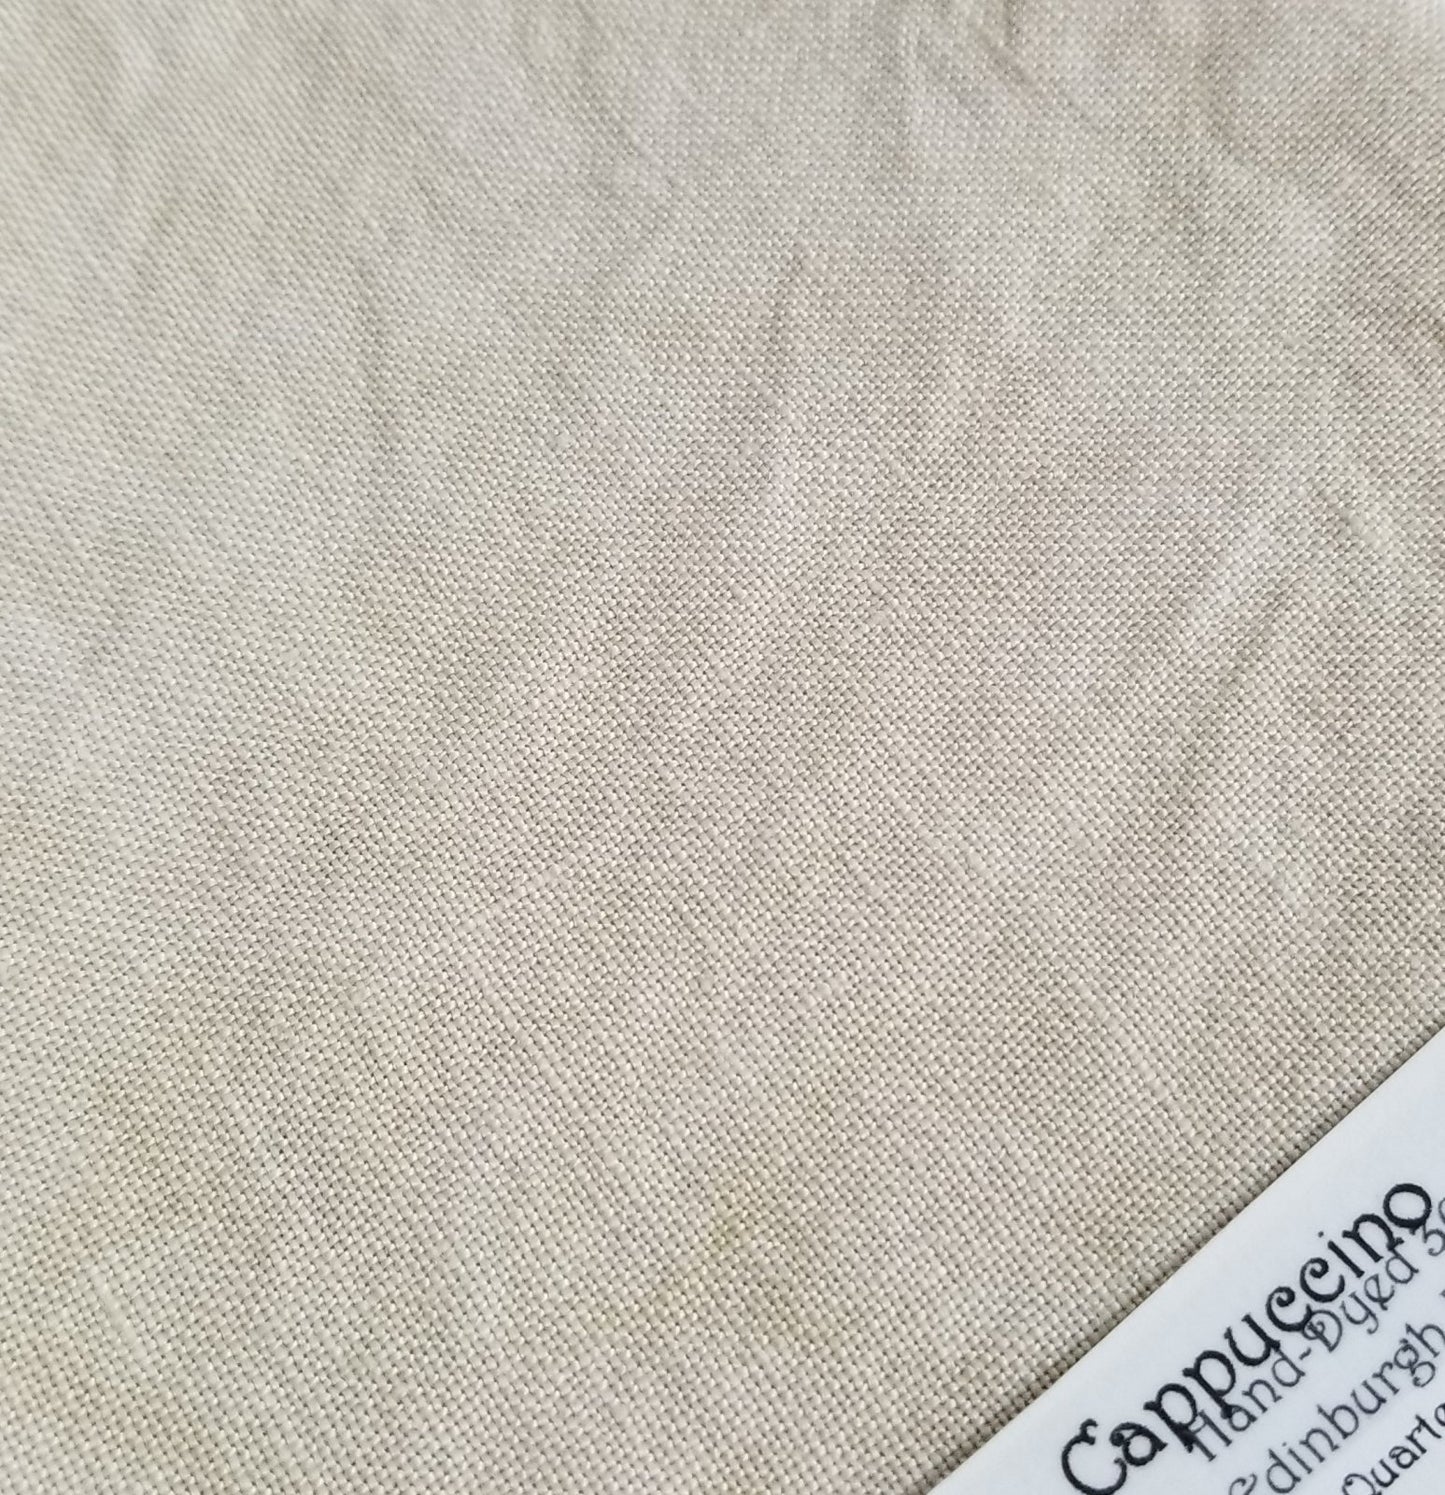 36 Count Linen - Cappuccino - Fiber on a Whim, Fabric, The Crafty Grimalkin - A Cross Stitch Store